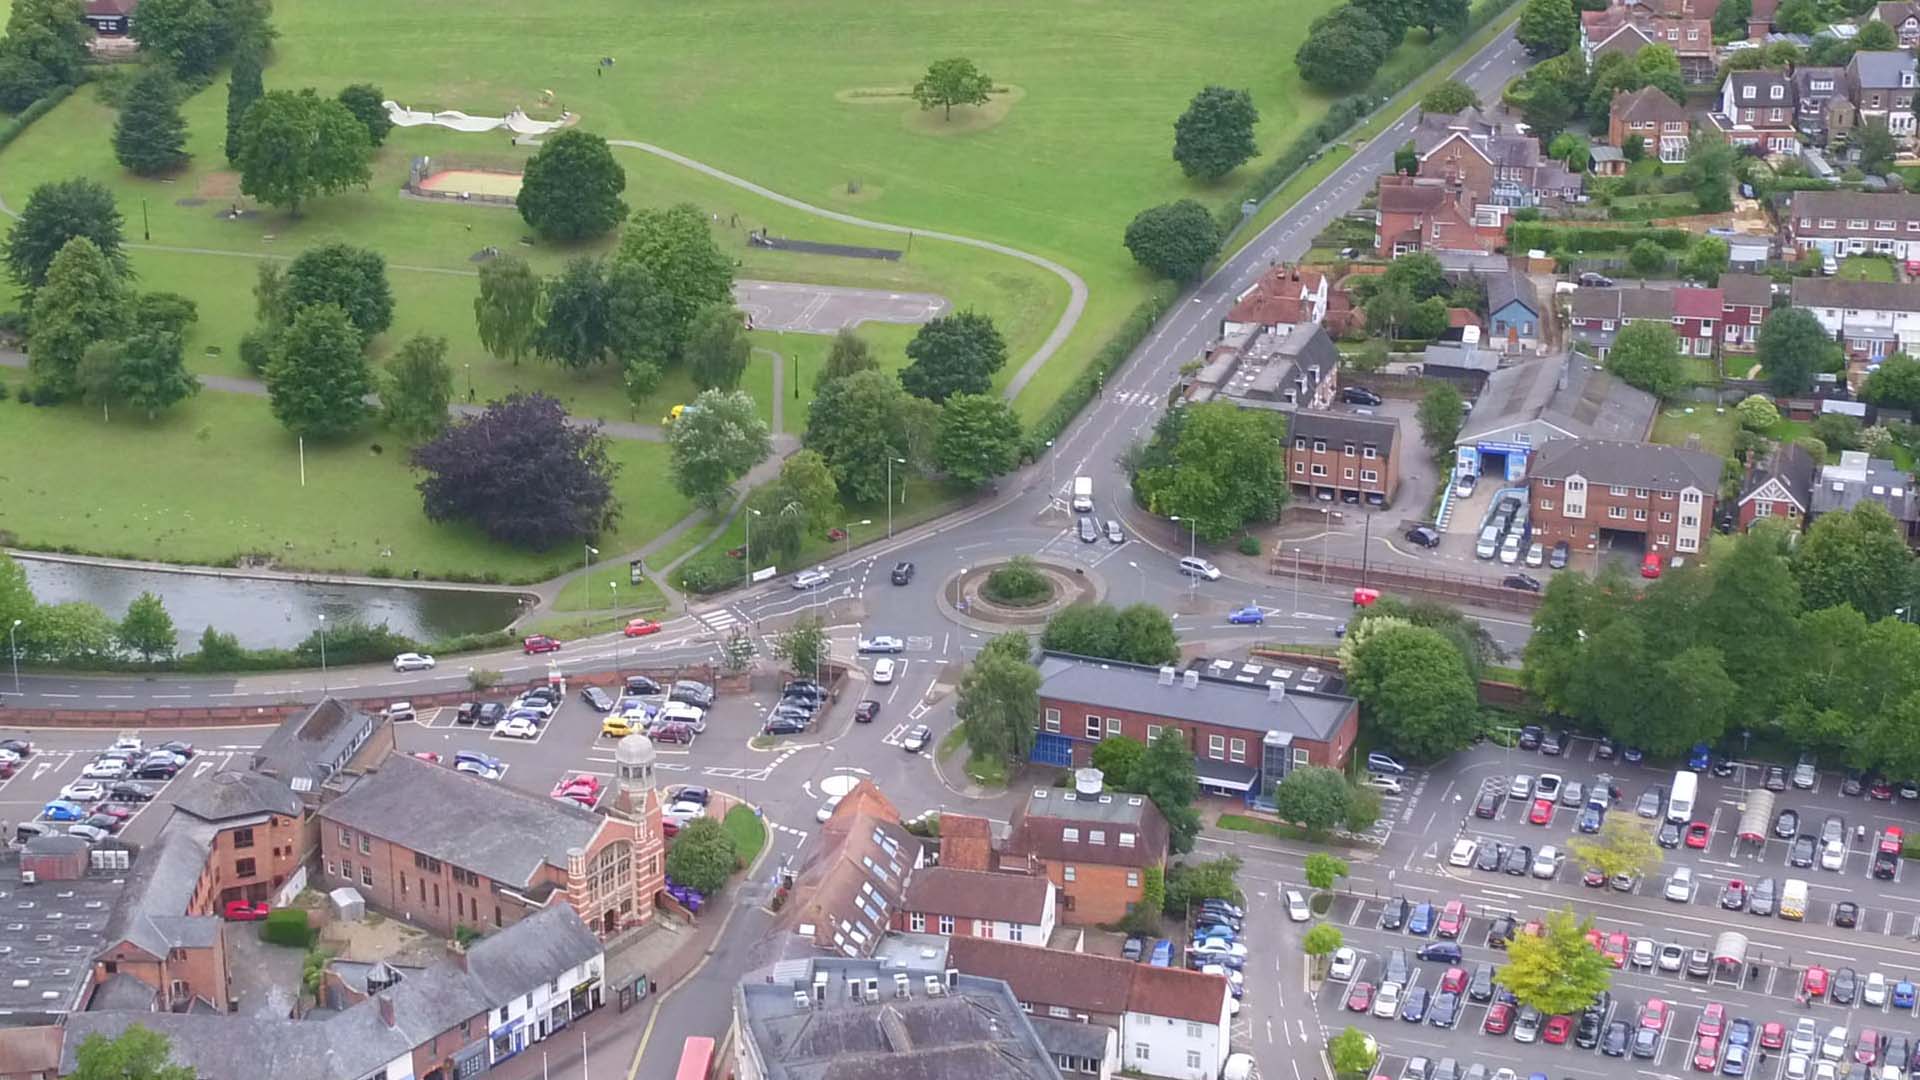 Aerial photo of Chesham showing the town and Lowndes Park